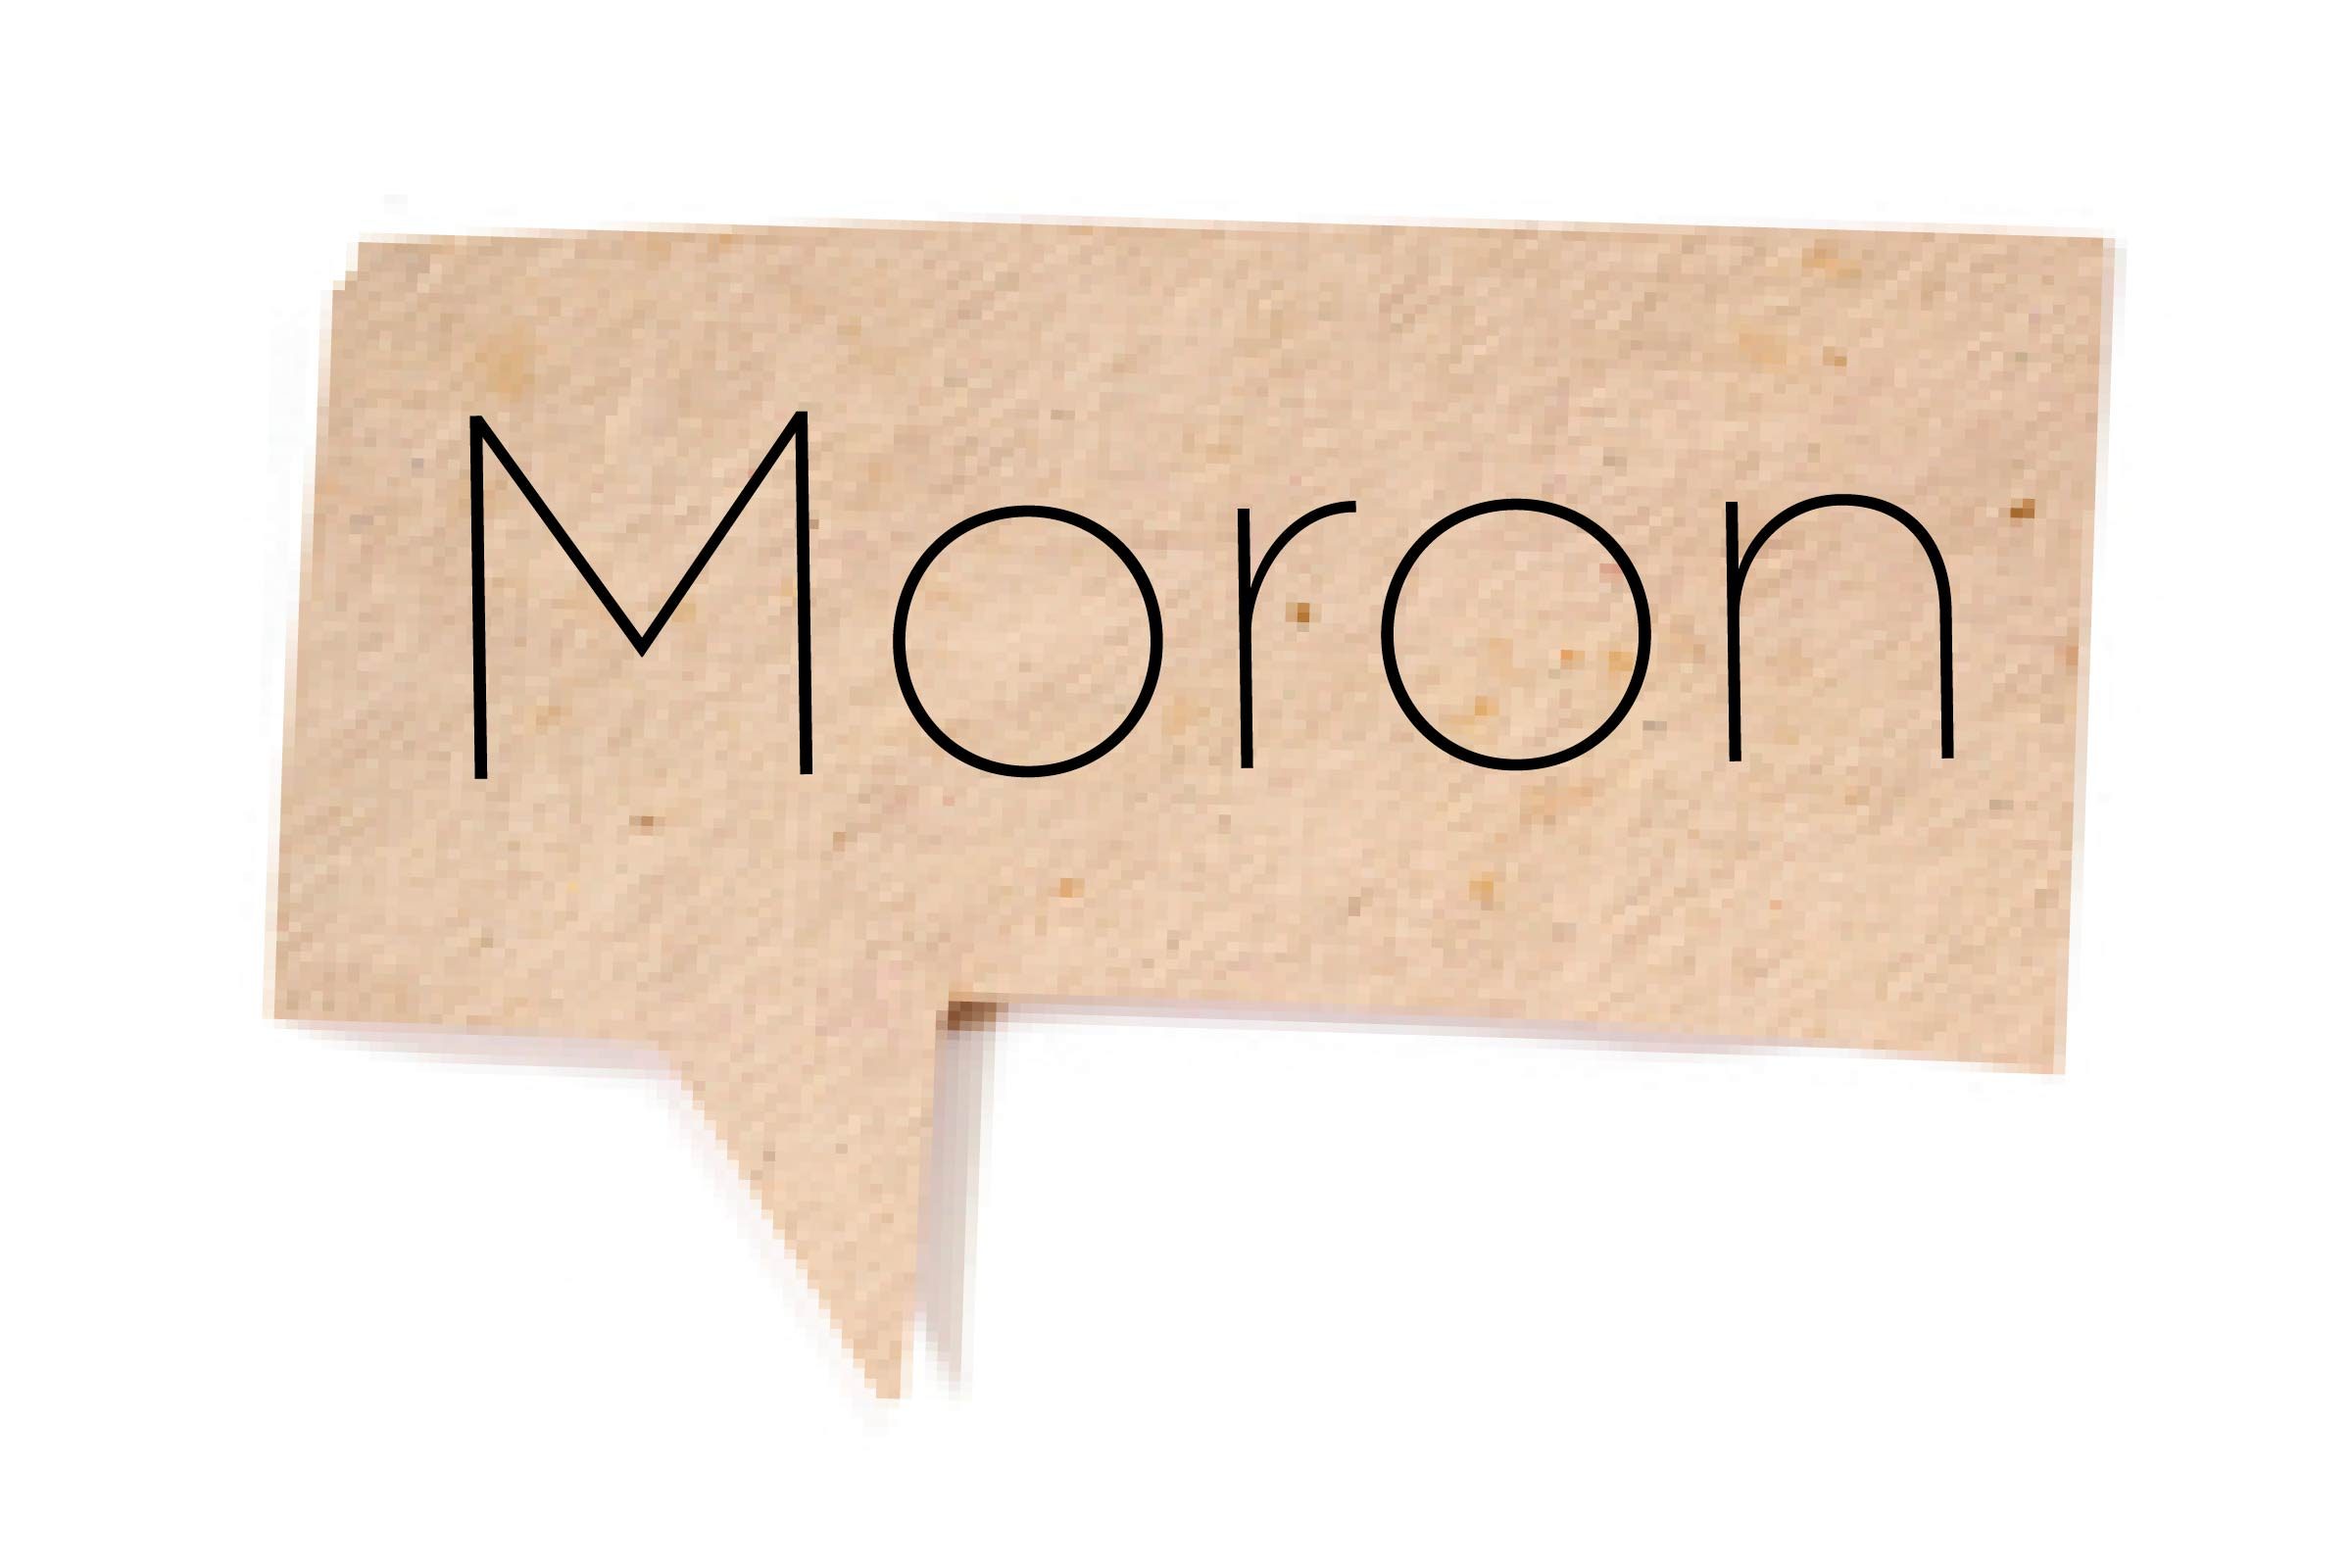 <p>In the early-twentieth century, "moron" was the term given to folks with a learning disability. The term originates as a word meaning "stupid" in ancient Greek. Its history is cruel, so stay away from tossing this around. On the other hand, find out some <a href="https://www.rd.com/list/insults-into-compliments/">words that used to be insults—but have turned into compliments</a>.</p>